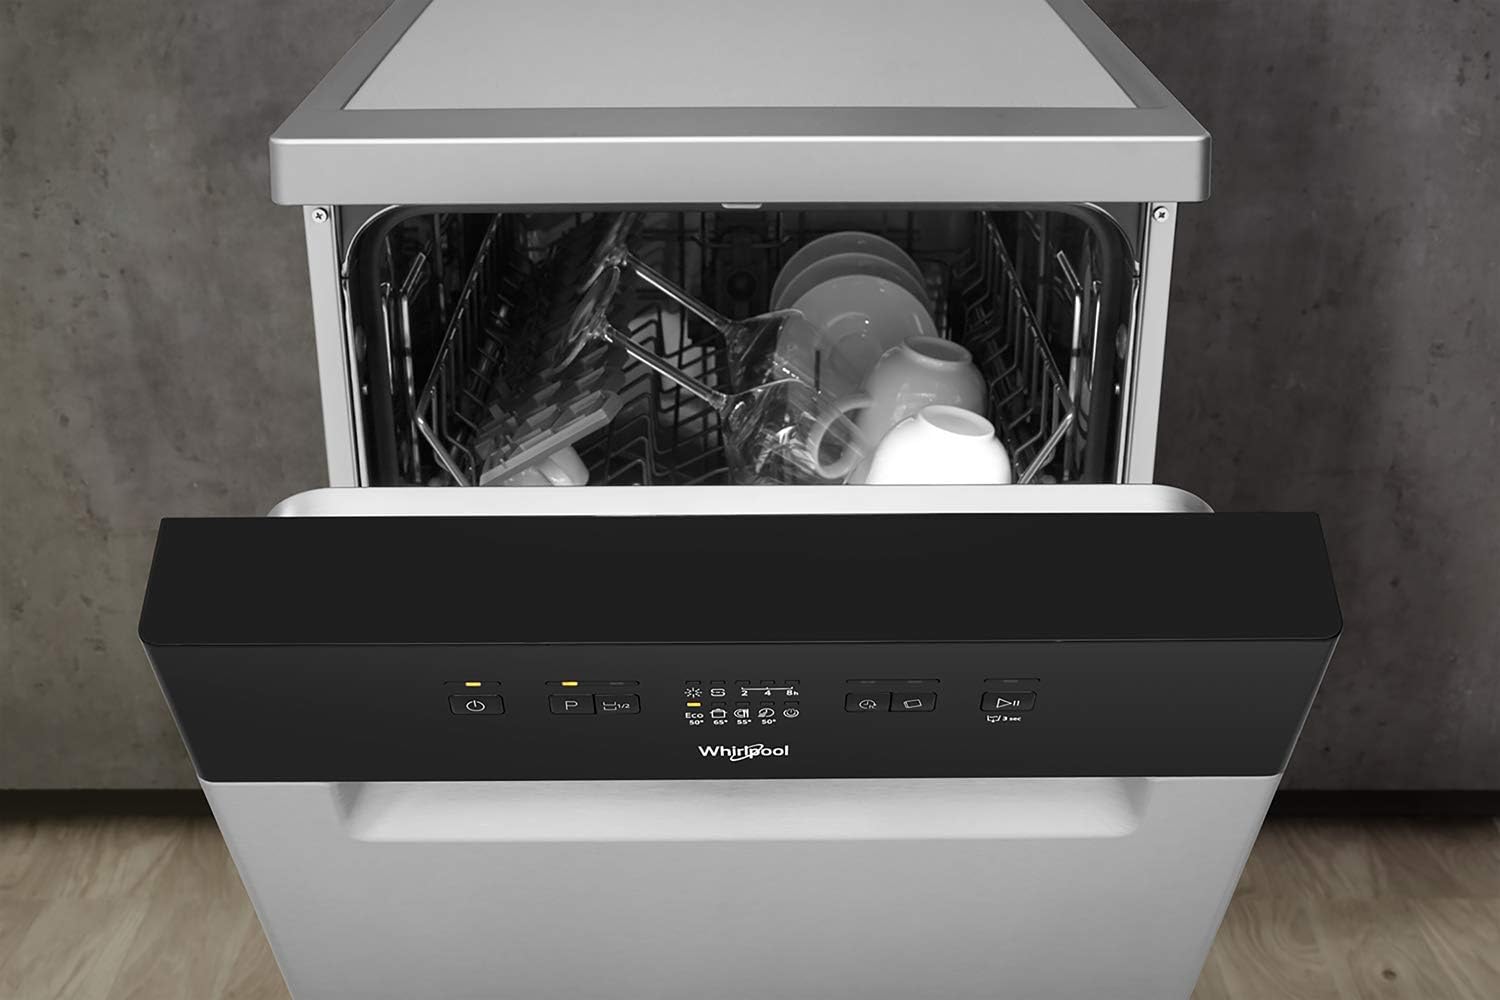 whirlpool dishwasher review